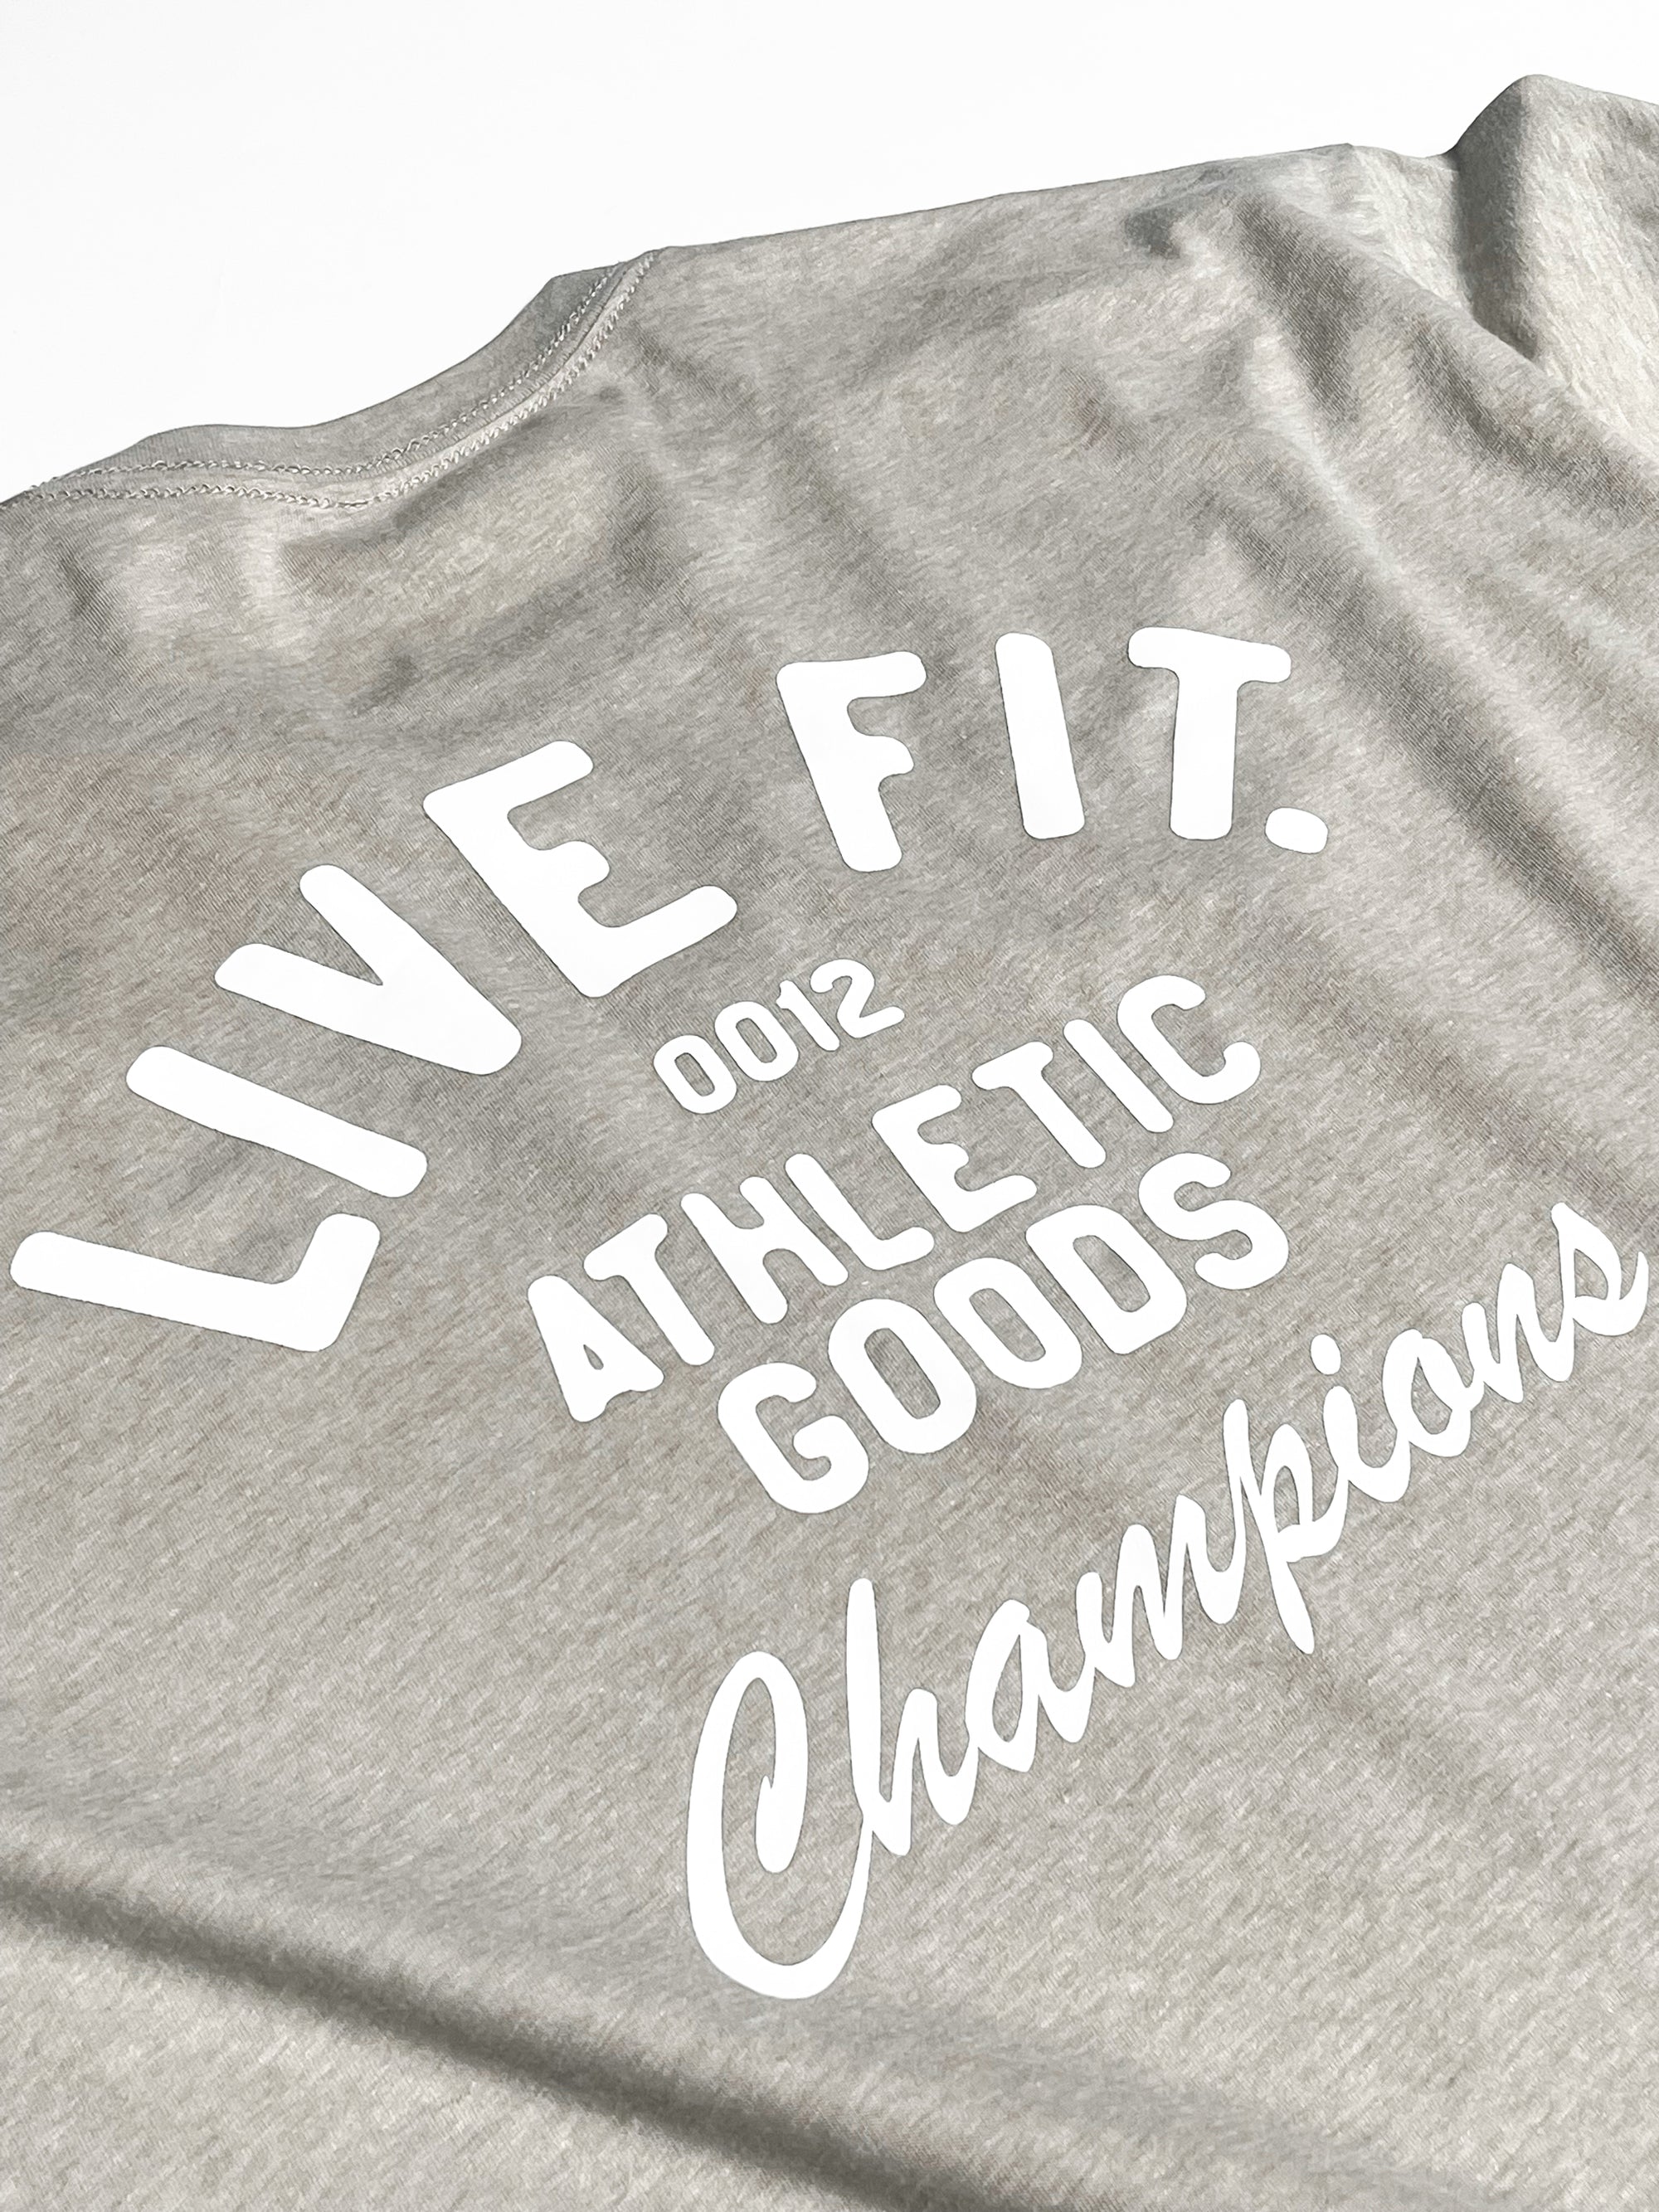 Athletic Goods Tee - Black, Live Fit Apparel